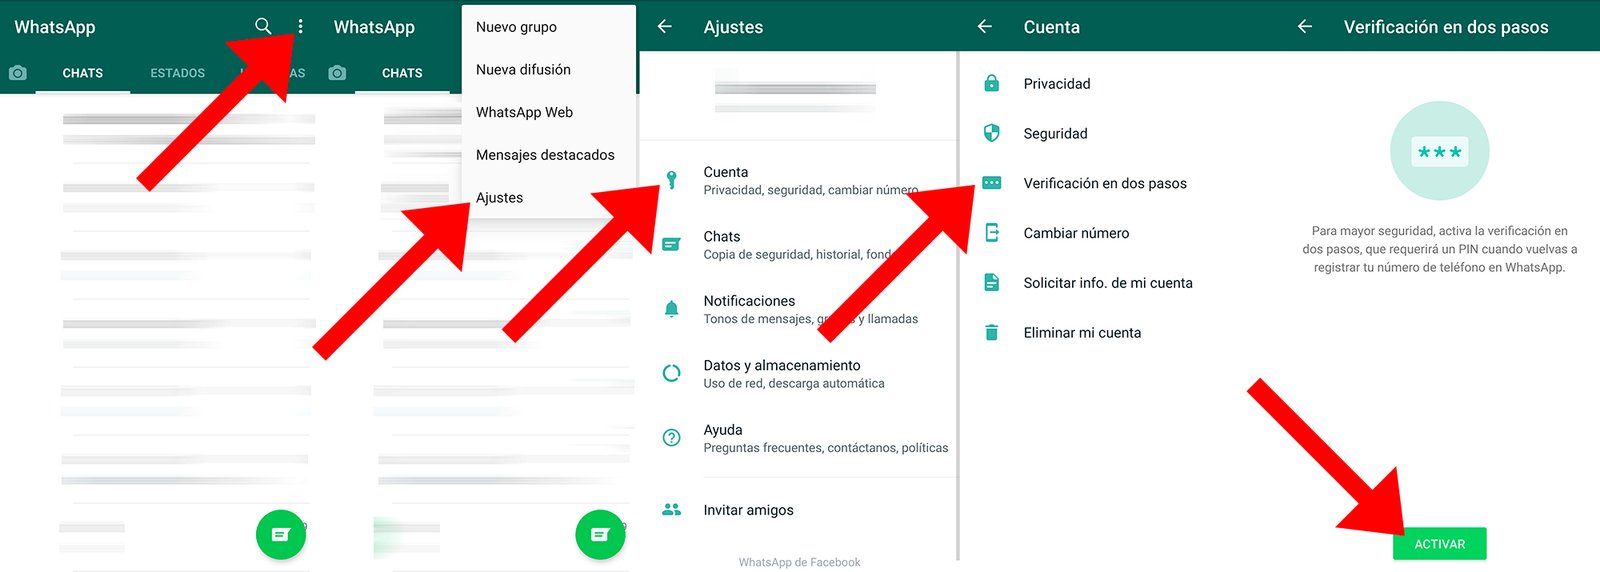 Spy on WhatsApp: how to activate two-step verification